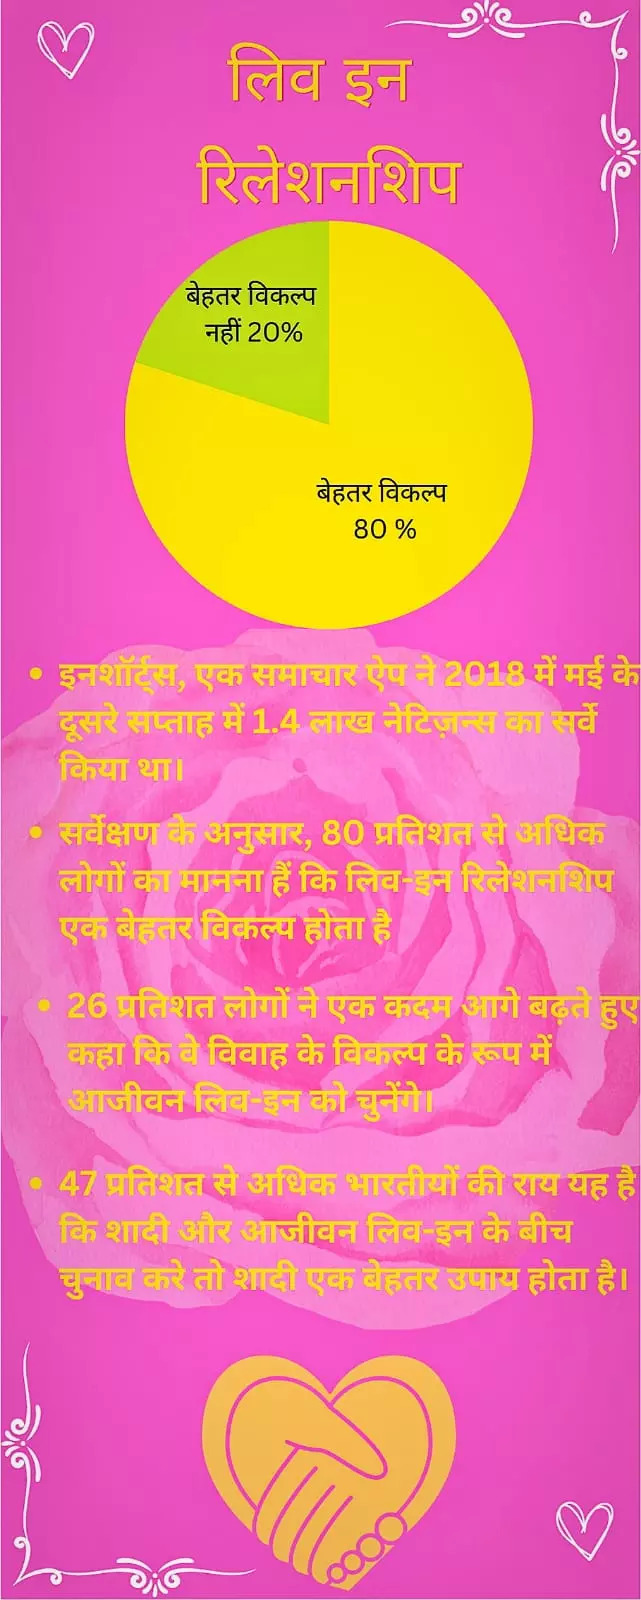 Infographic Made by Me on Live-in Relationship.